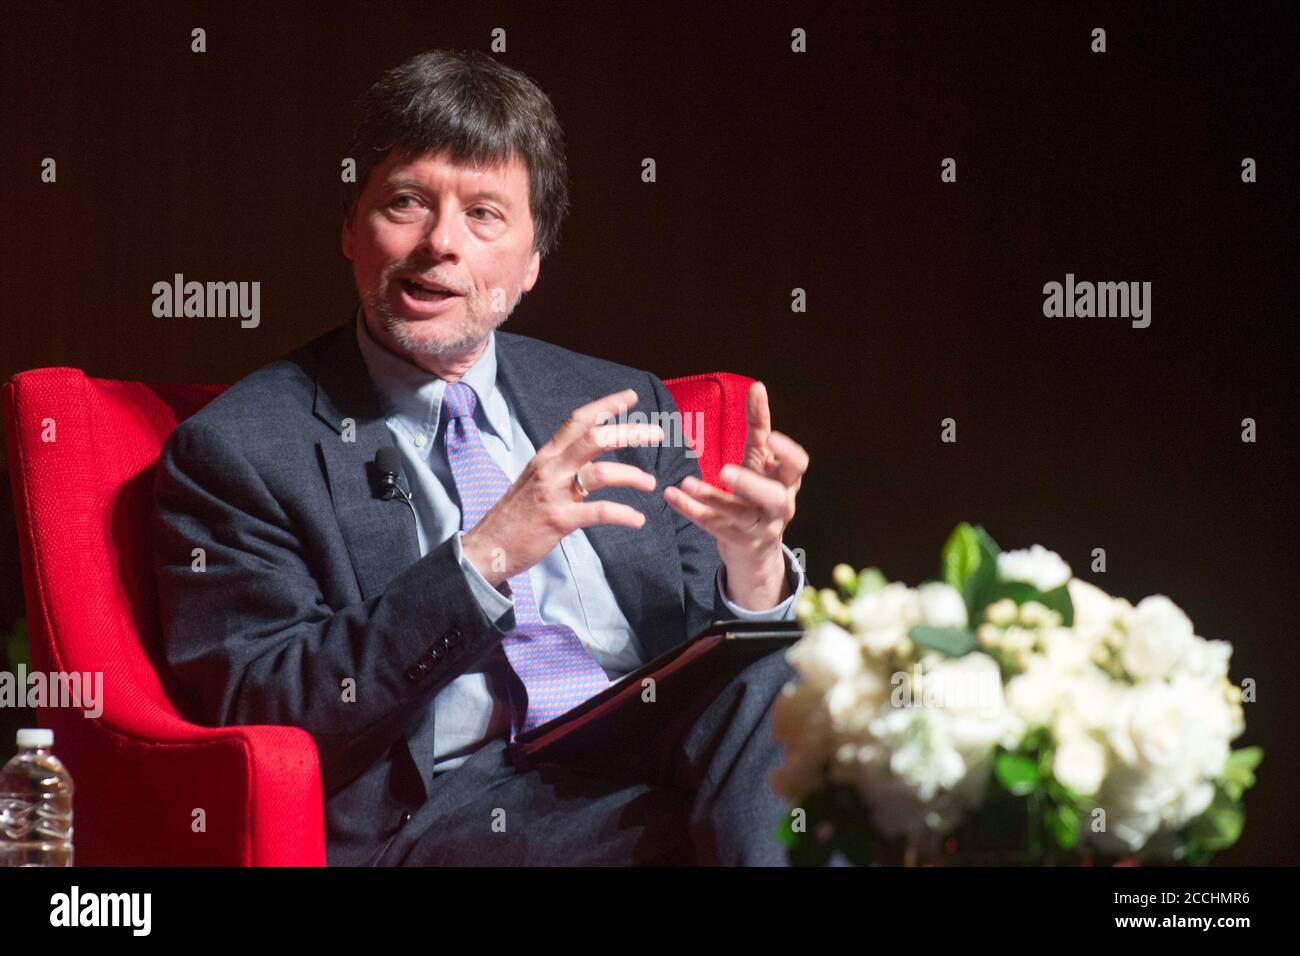 Documentary filmmaker Ken Burns during a conversation about the Vietnam War at the LBJ Presidential Library April 27, 2016 in Austin, Texas. Burns and his film team are nearing completion on a 10-part, 18-hour documentary series, The Vietnam War, to be aired on PBS. Stock Photo